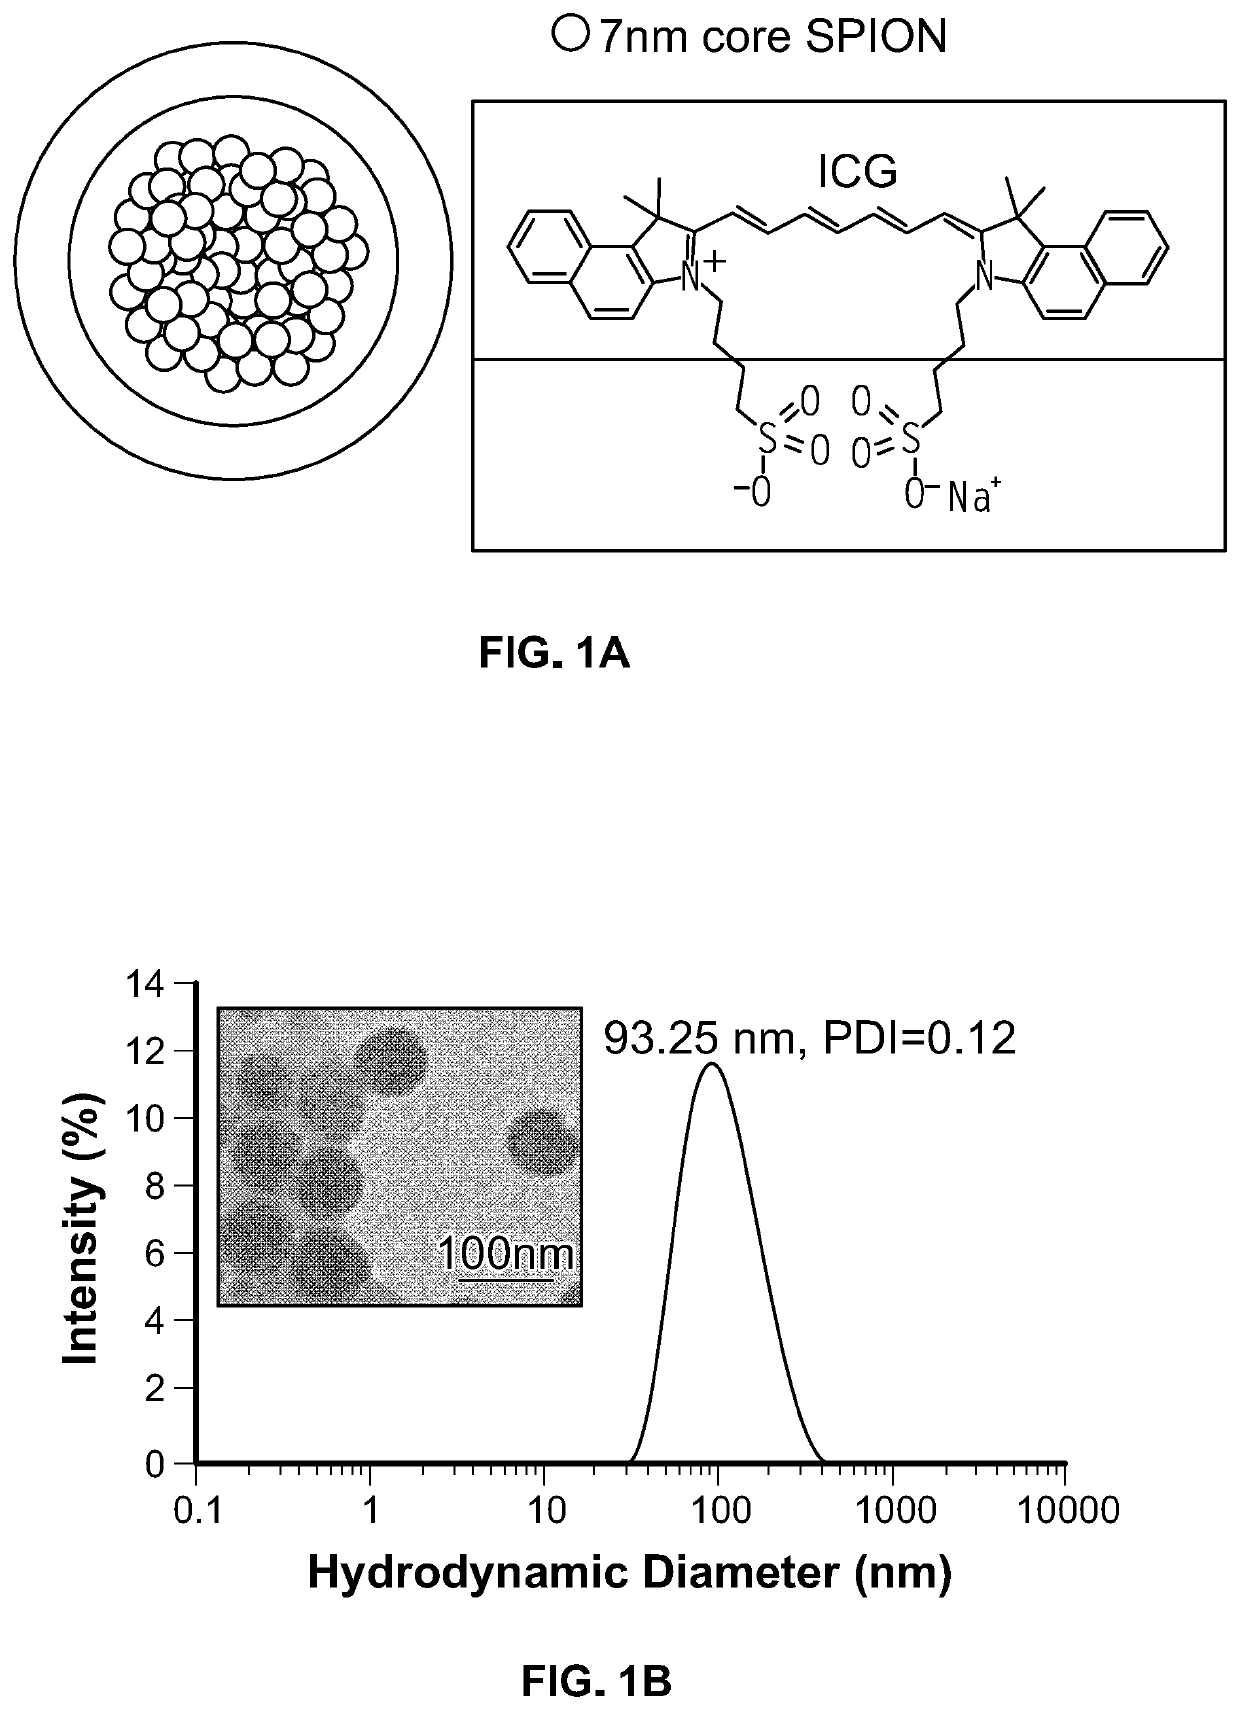 Amphiphilic dye-coated inorganic nanoparticle clusters